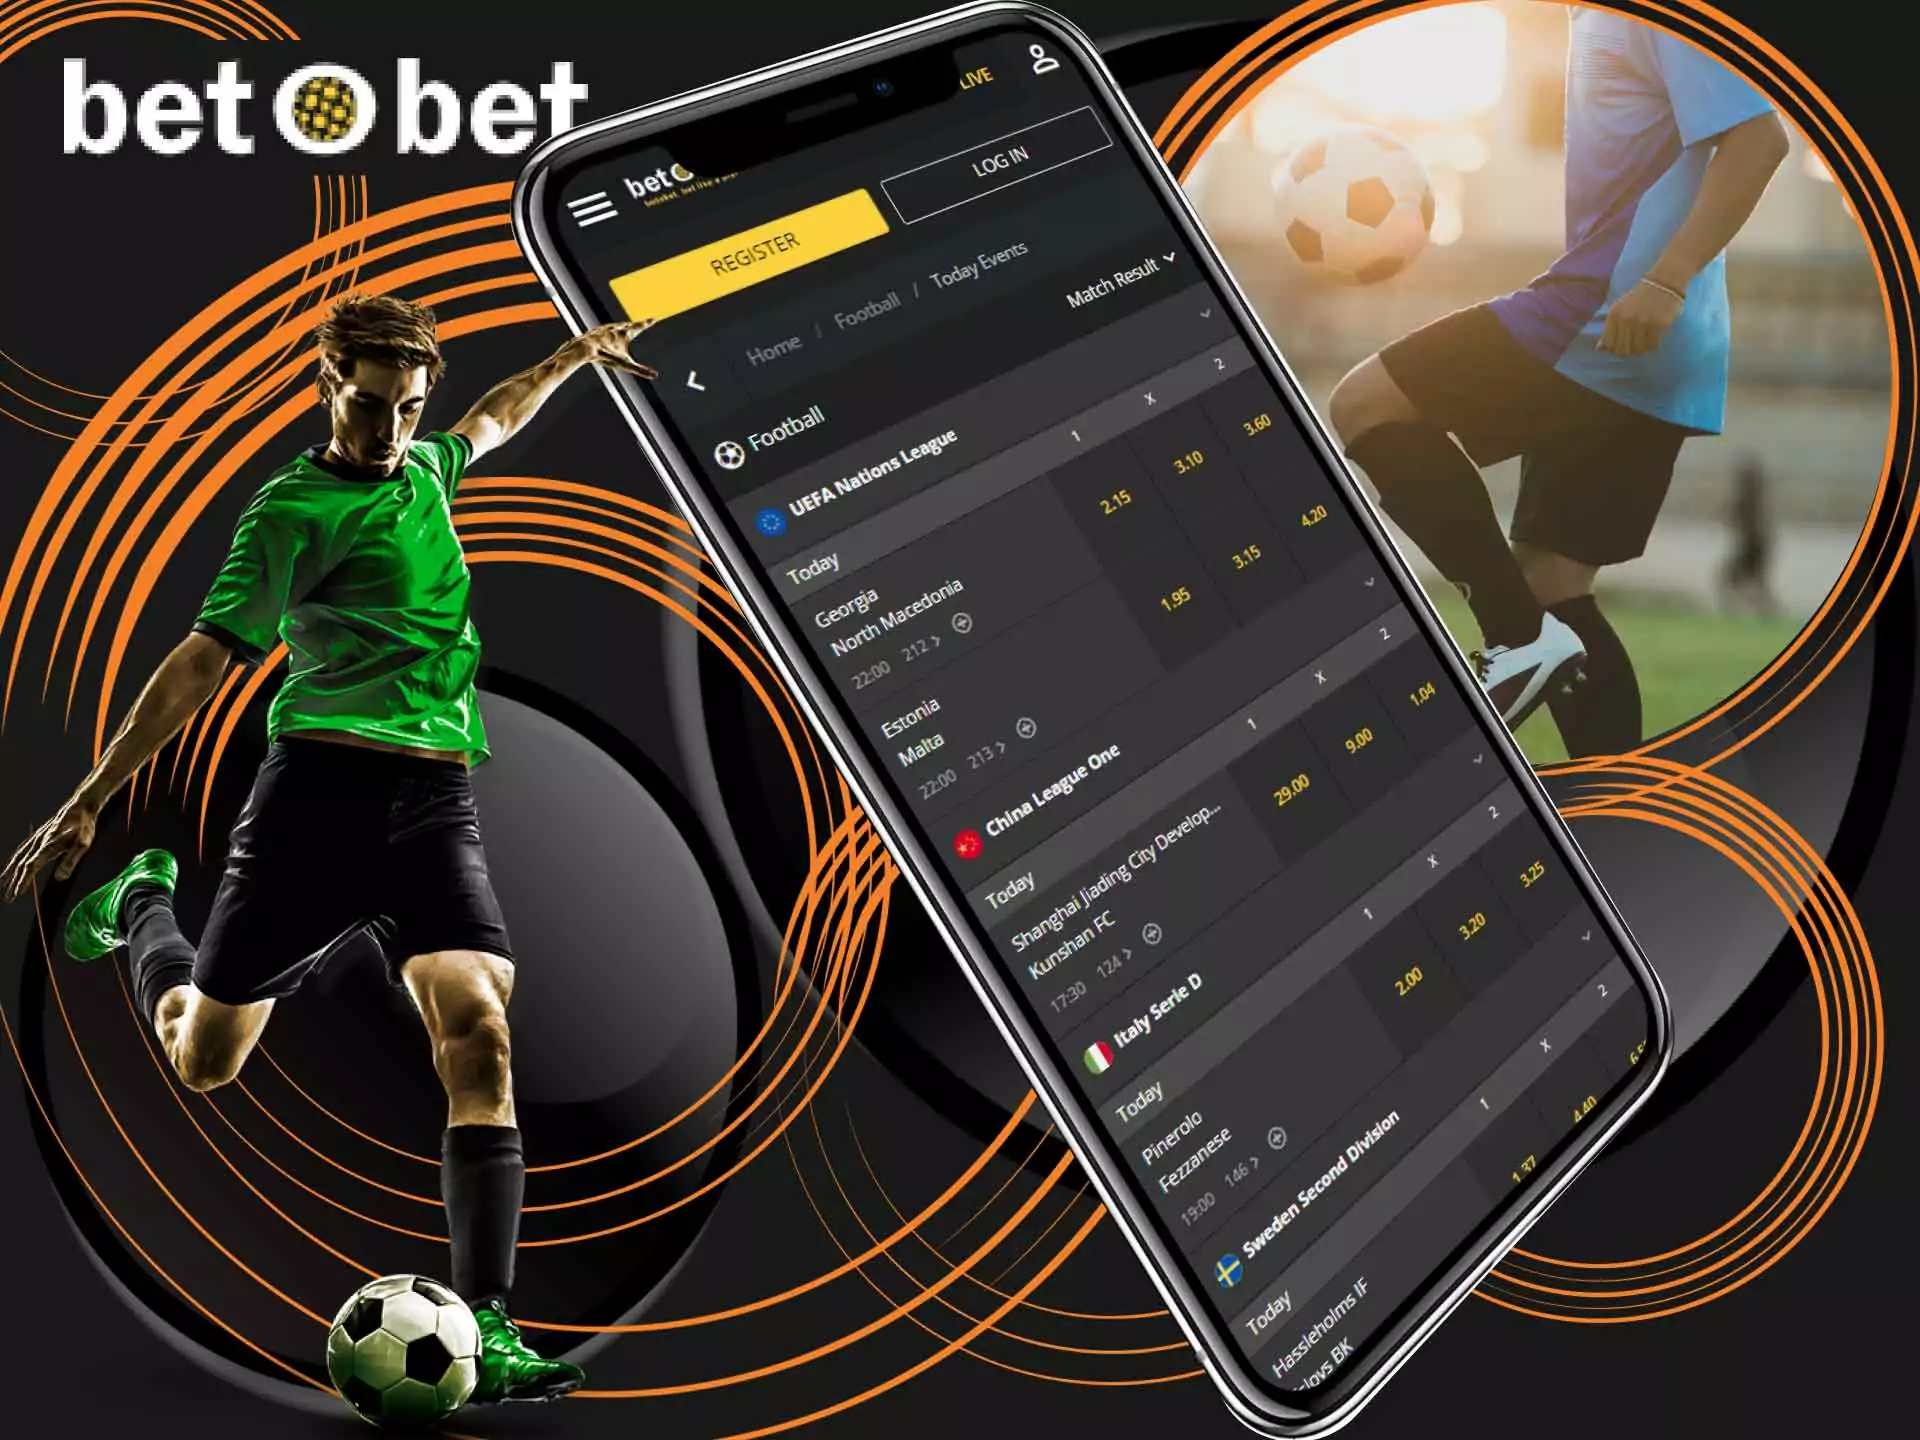 There are various football leagues on the BetOBet sportsbook.